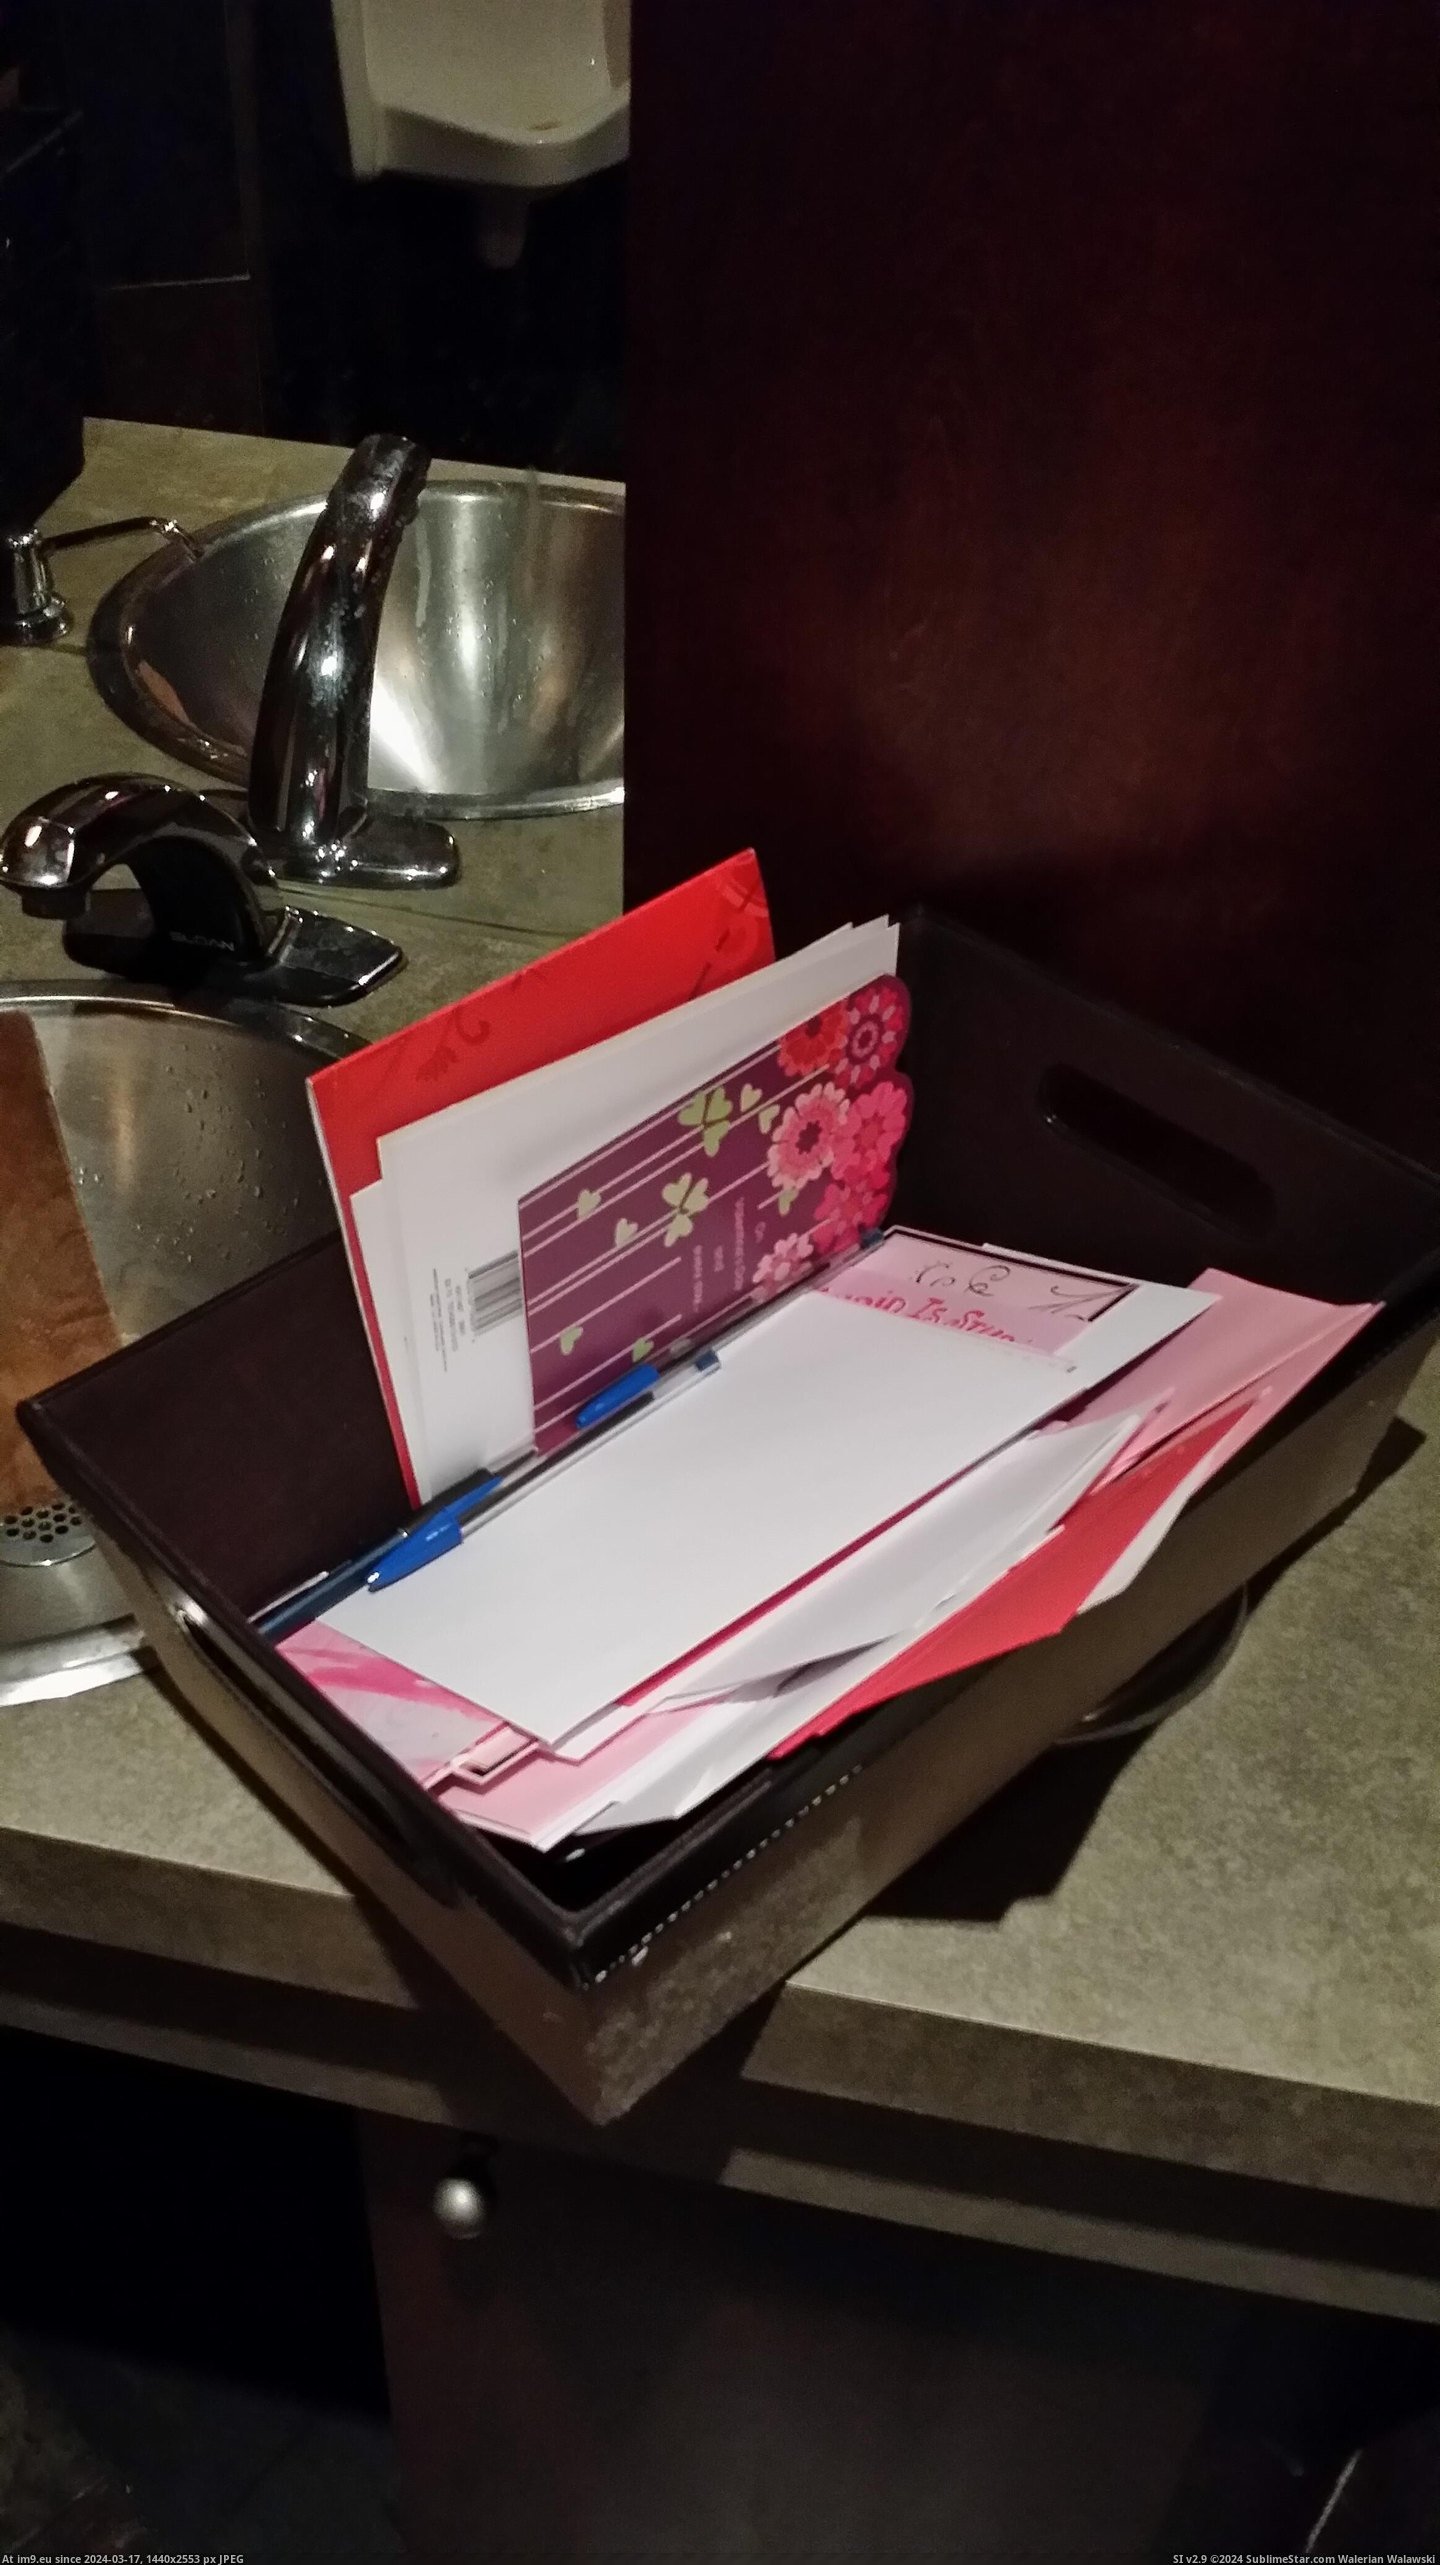 #Day #Restaurant #Valentines #Props #Washroom #Cards #Clever [Pics] Props to this restaurant for having blank valentines day cards in the washroom. Very, very clever Pic. (Image of album My r/PICS favs))